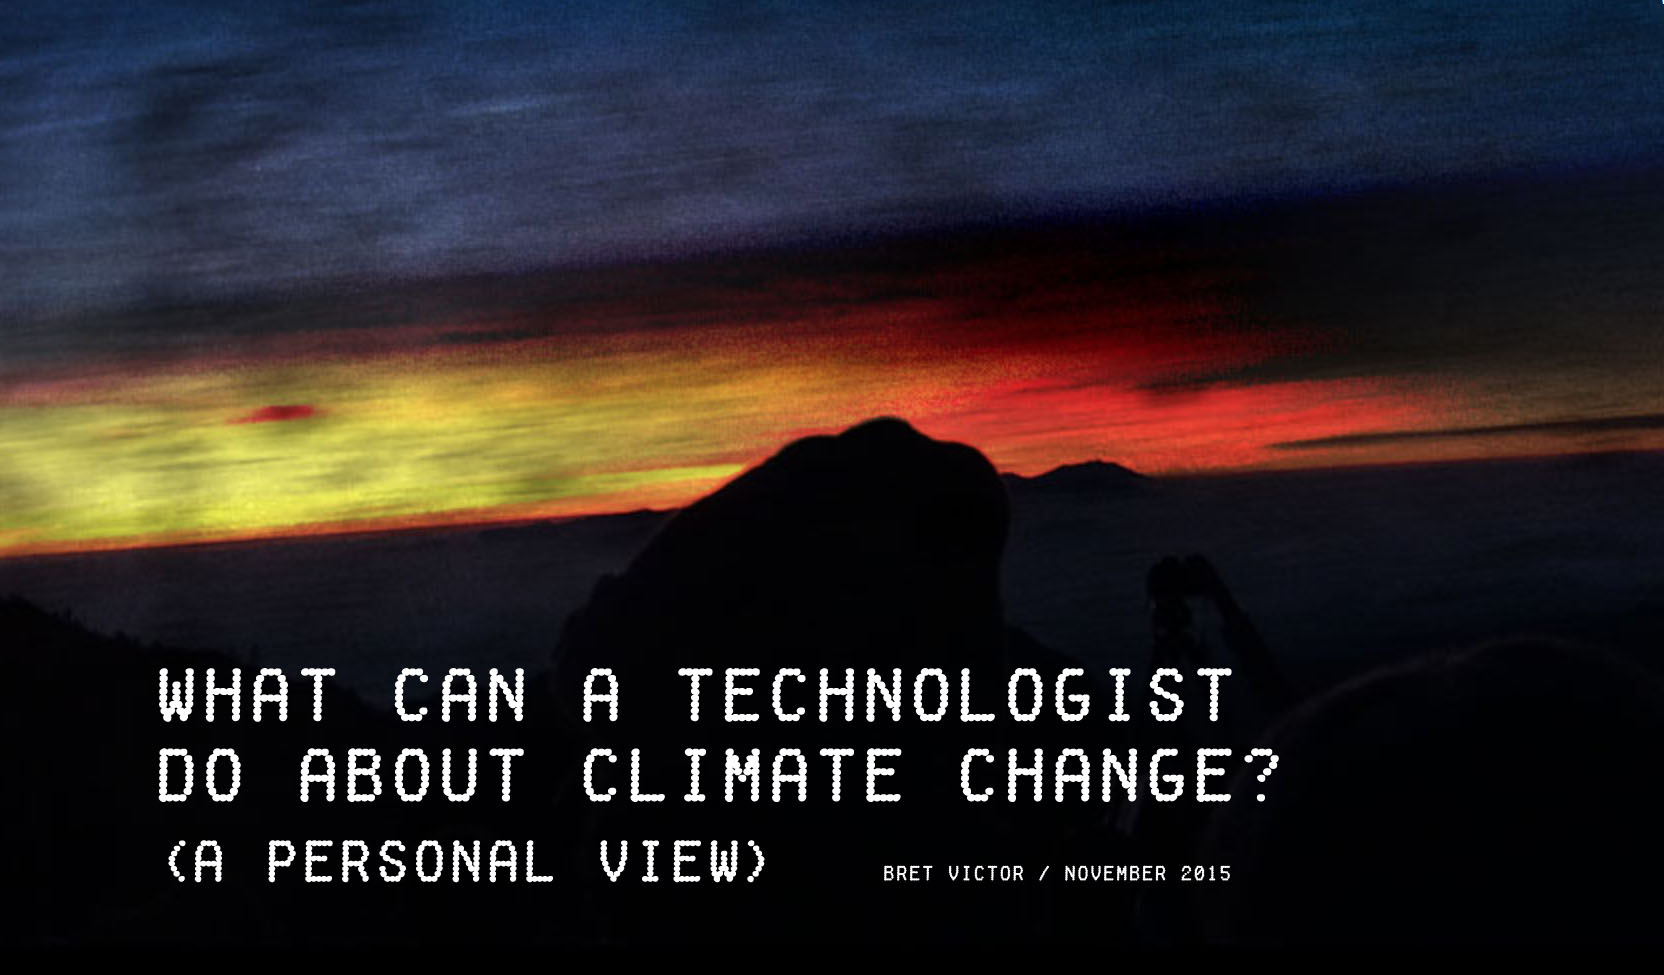 What can a technologist do about climate change?